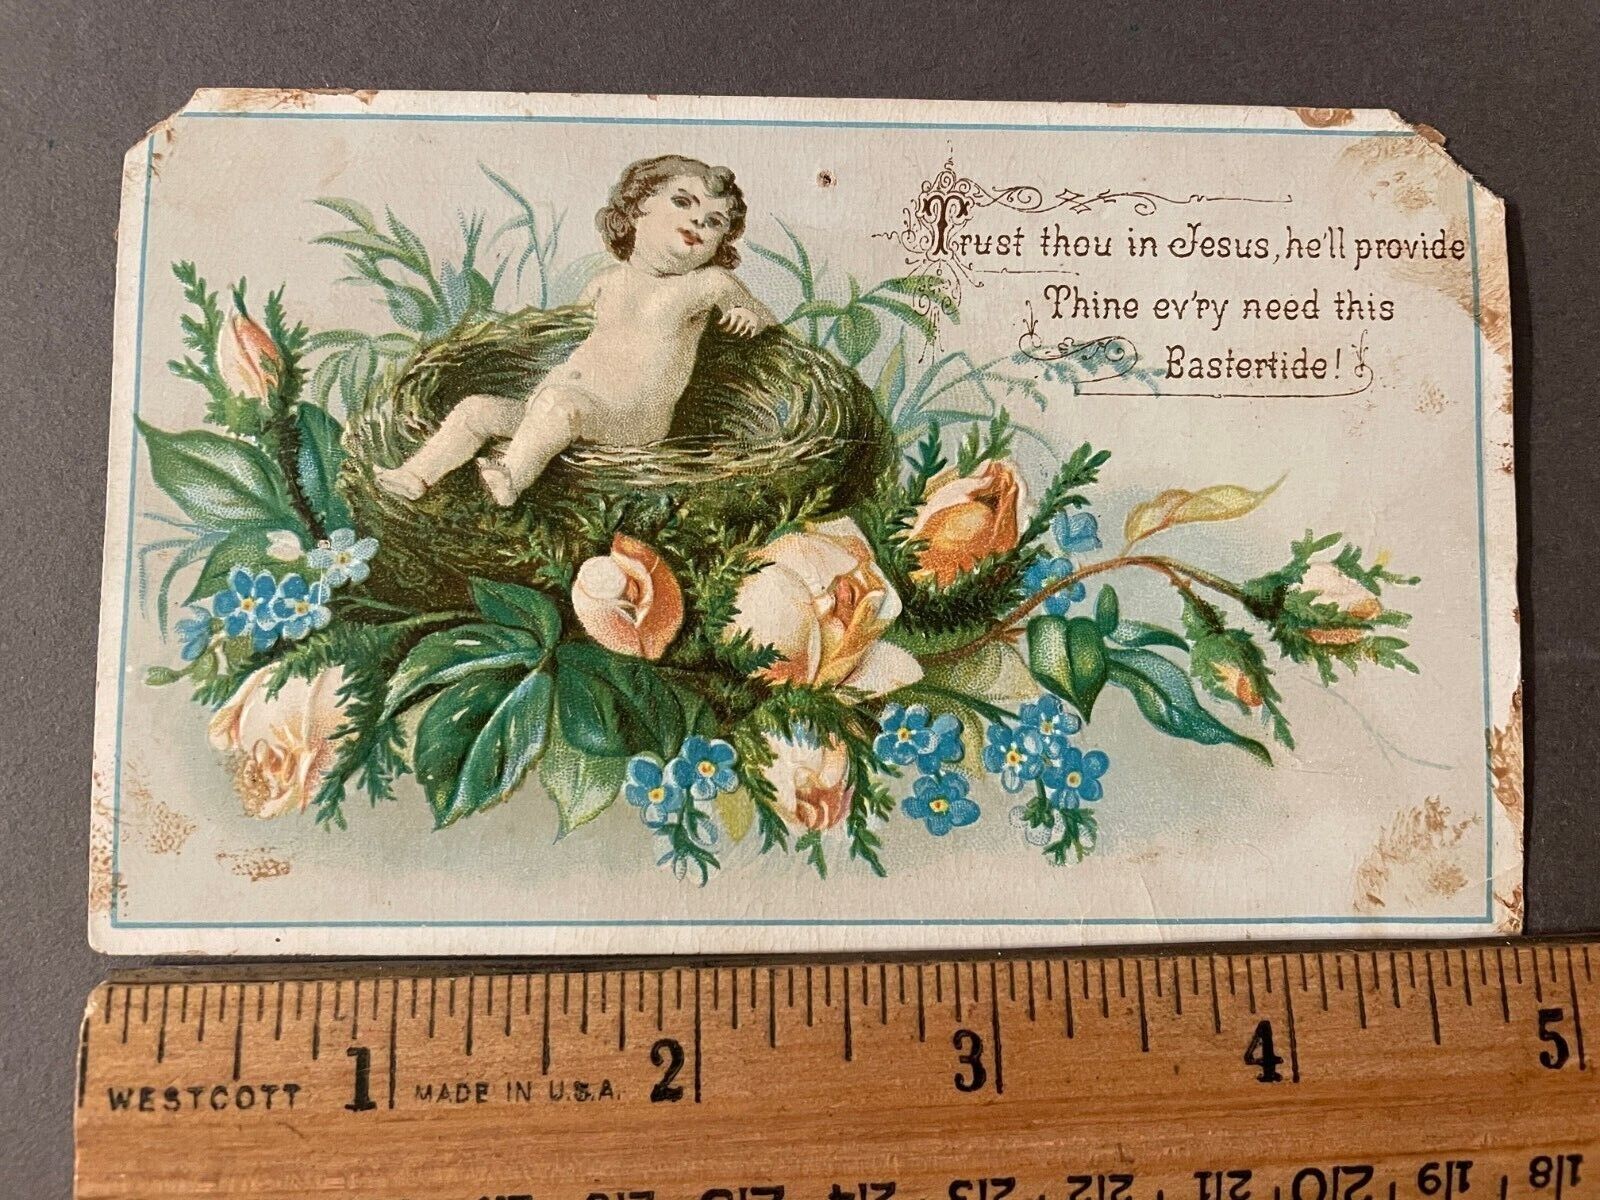 VICTORIAN TRADE CARD BUILD YOUR OWN LOT $5 EACH 10% OFF 2 0R MORE shipping $3